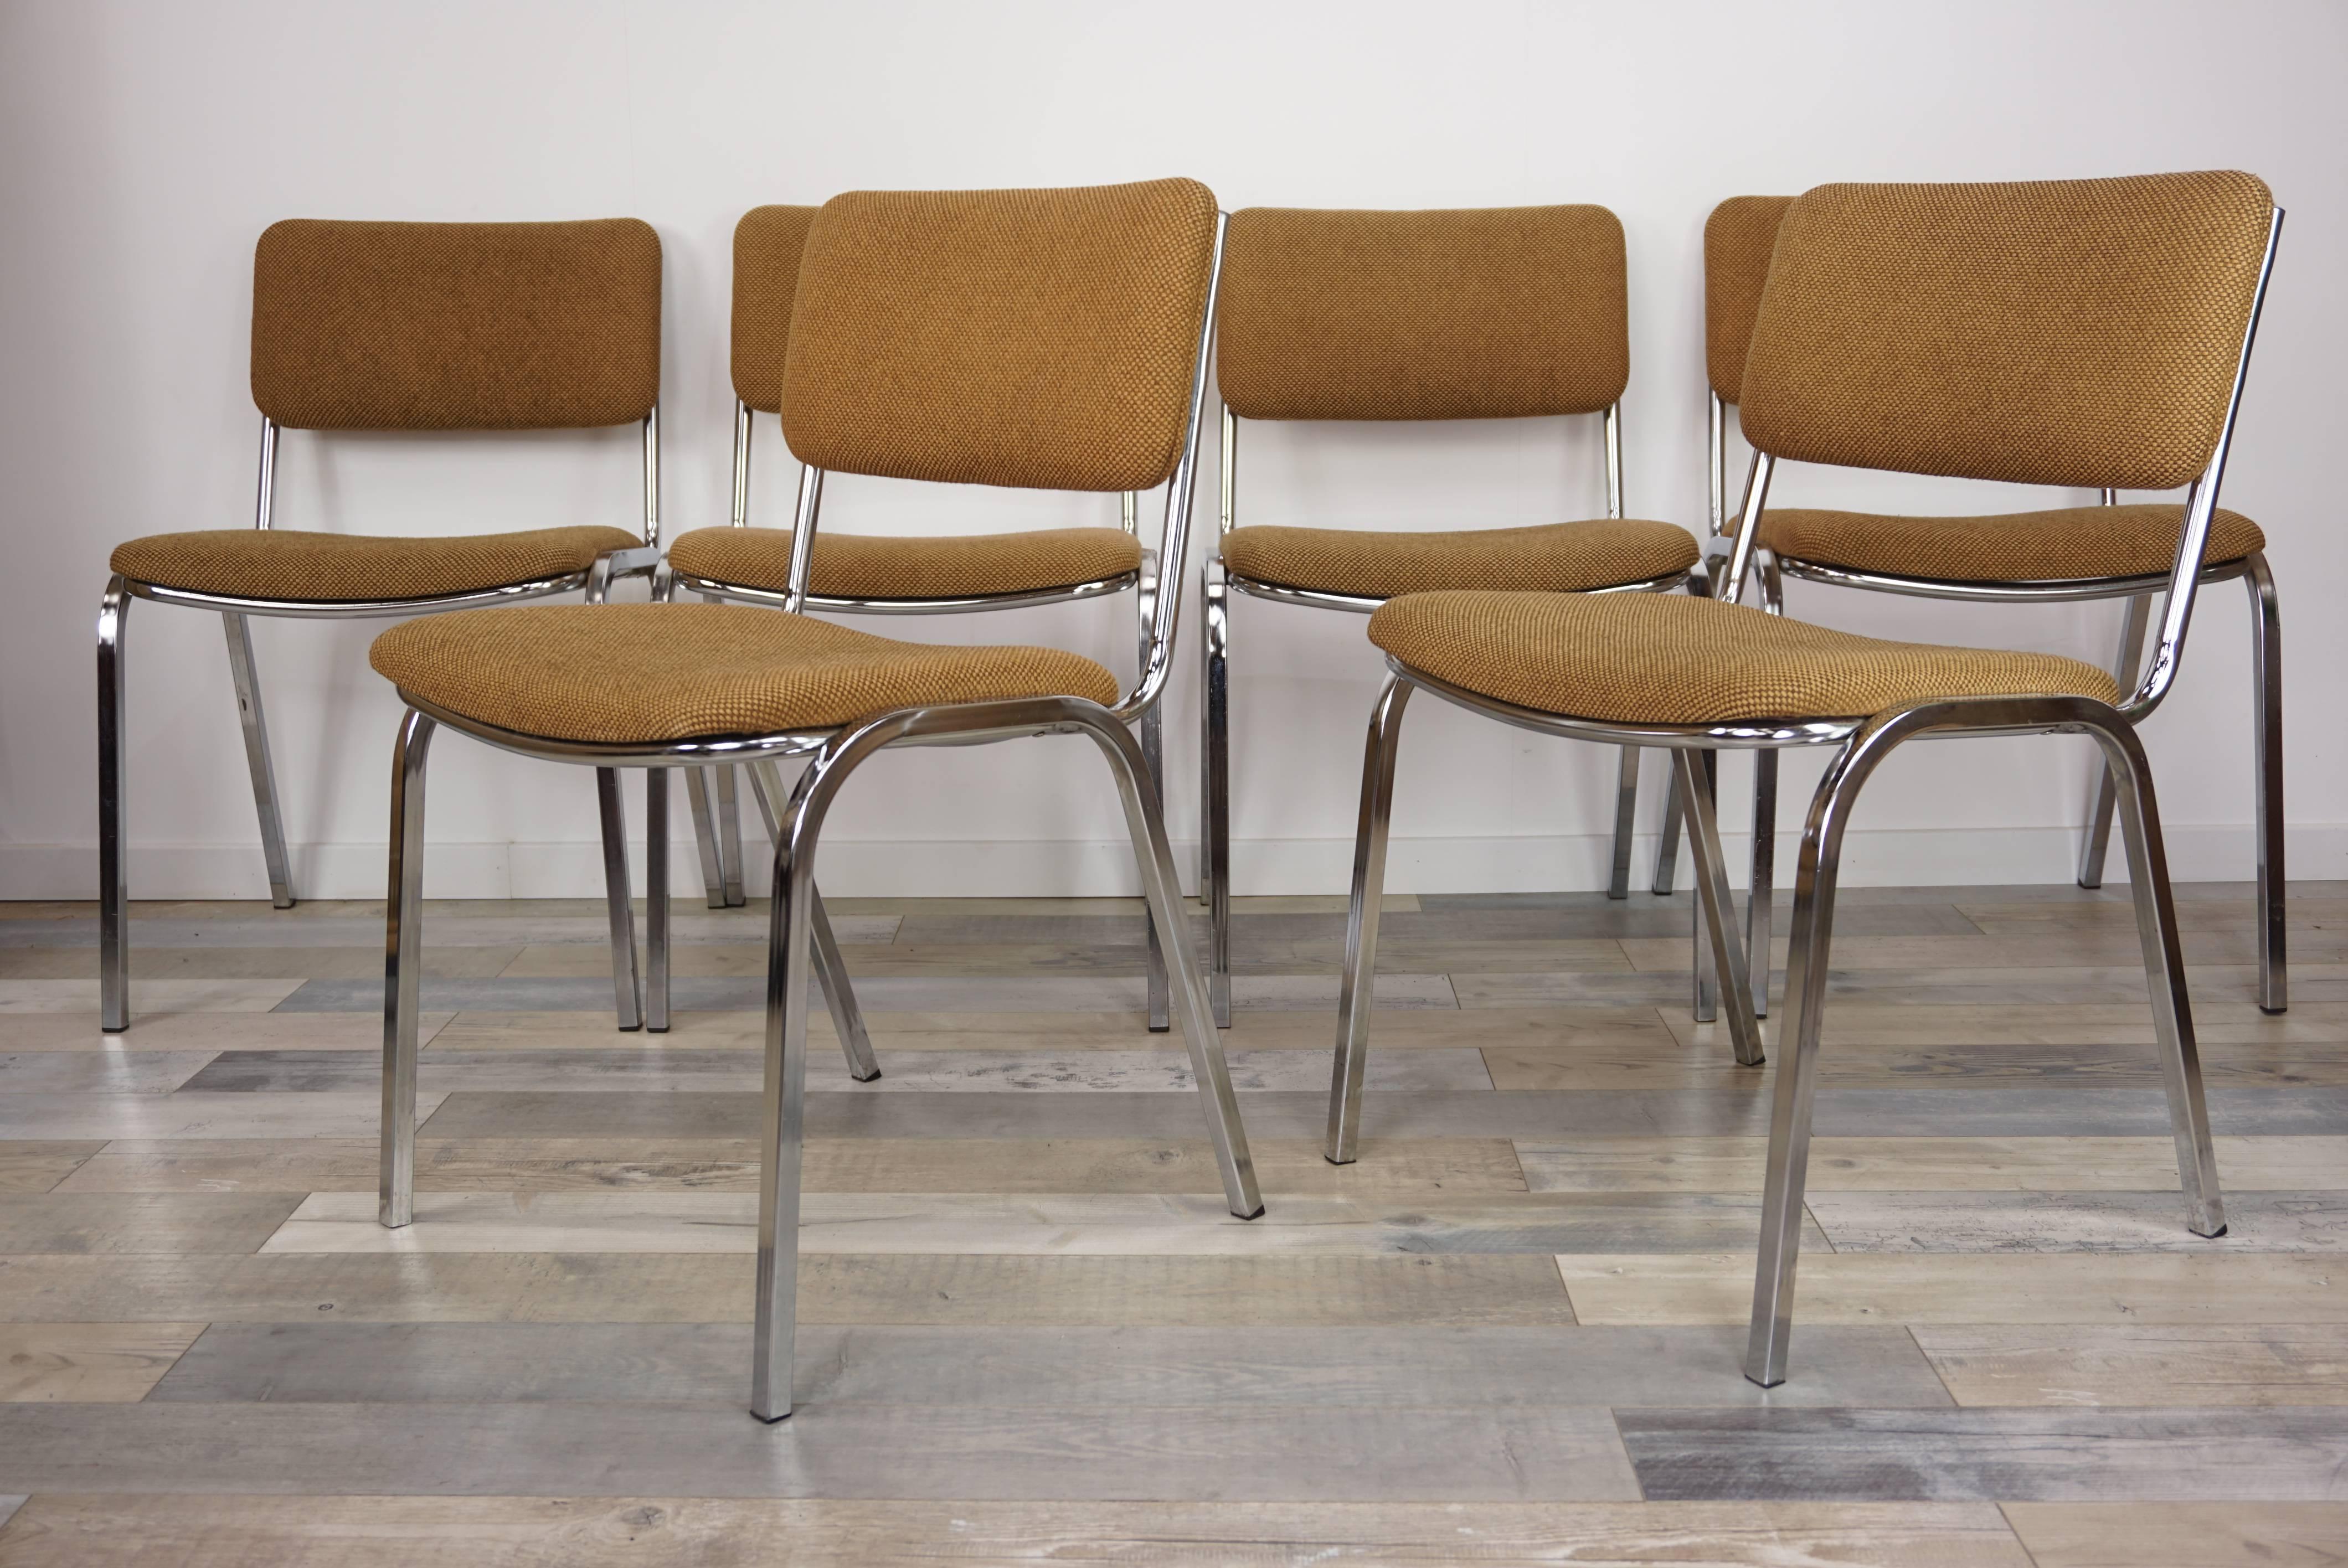 20th Century Chromed and Tweed Set of Six Chairs French Design from the 1960s